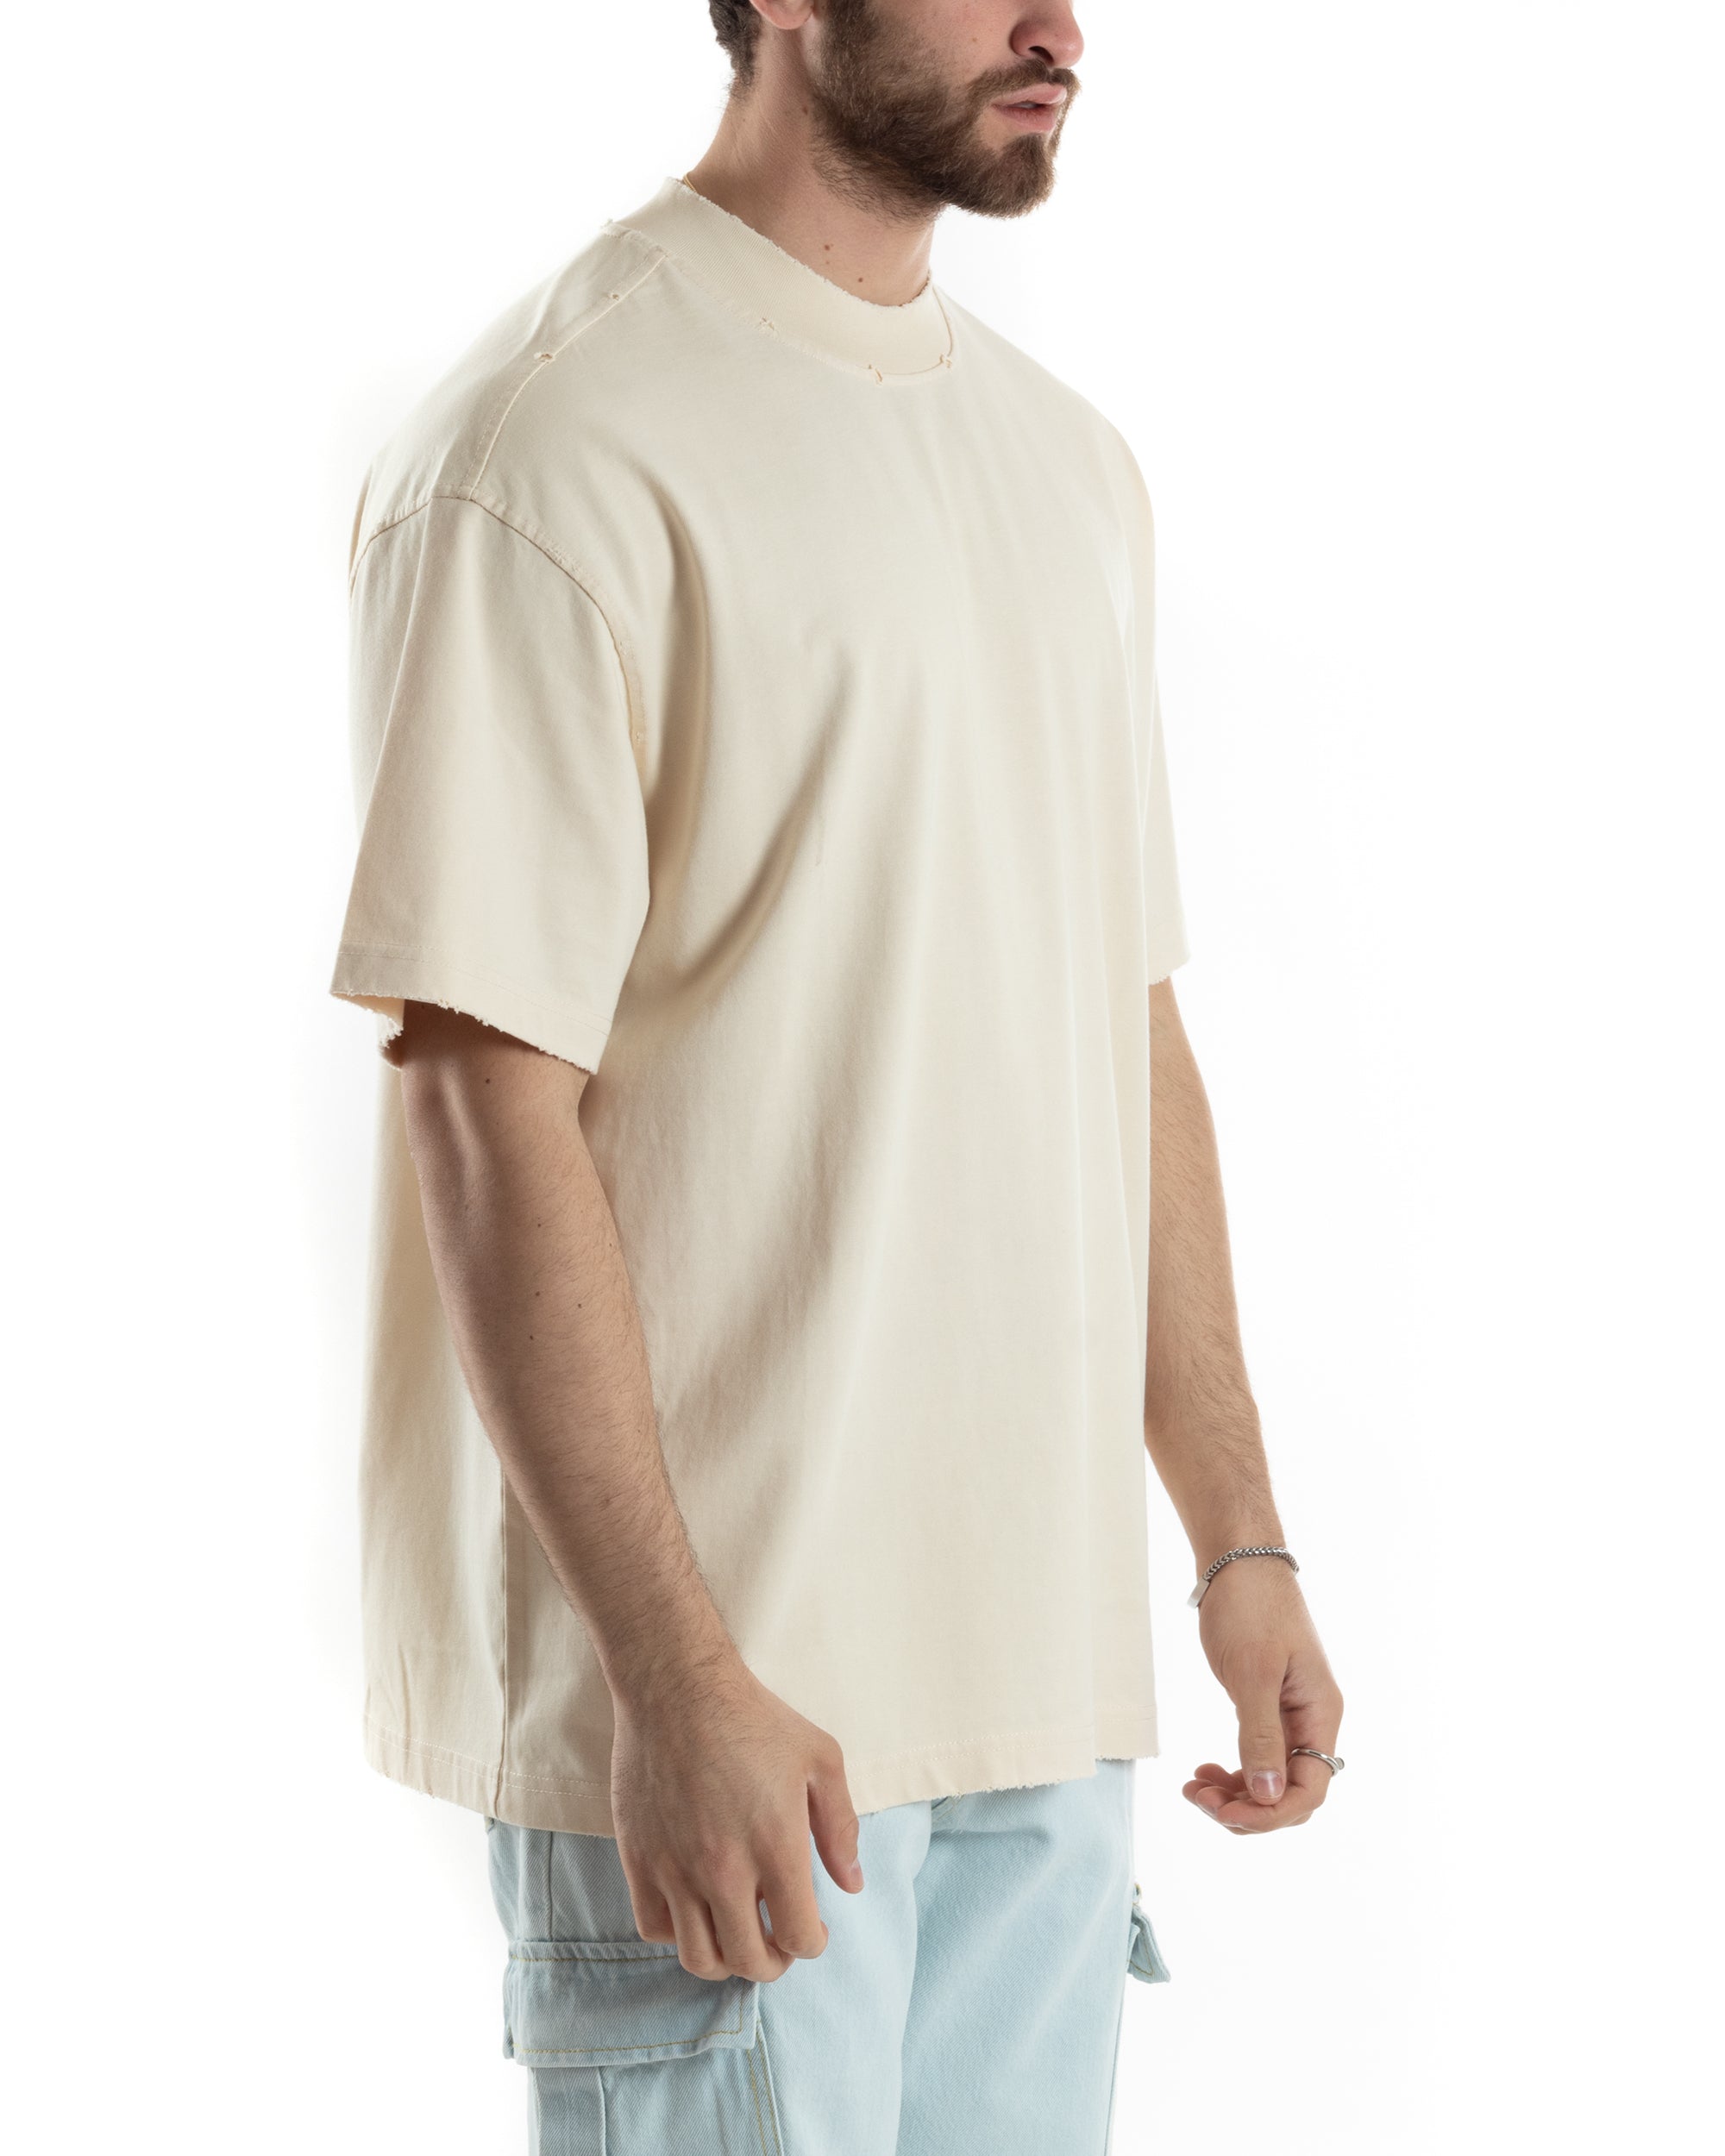 Basic Men's T-shirt Solid Color Purple Crew Neck Short Sleeve Casual Slits GIOSAL-TS2938A